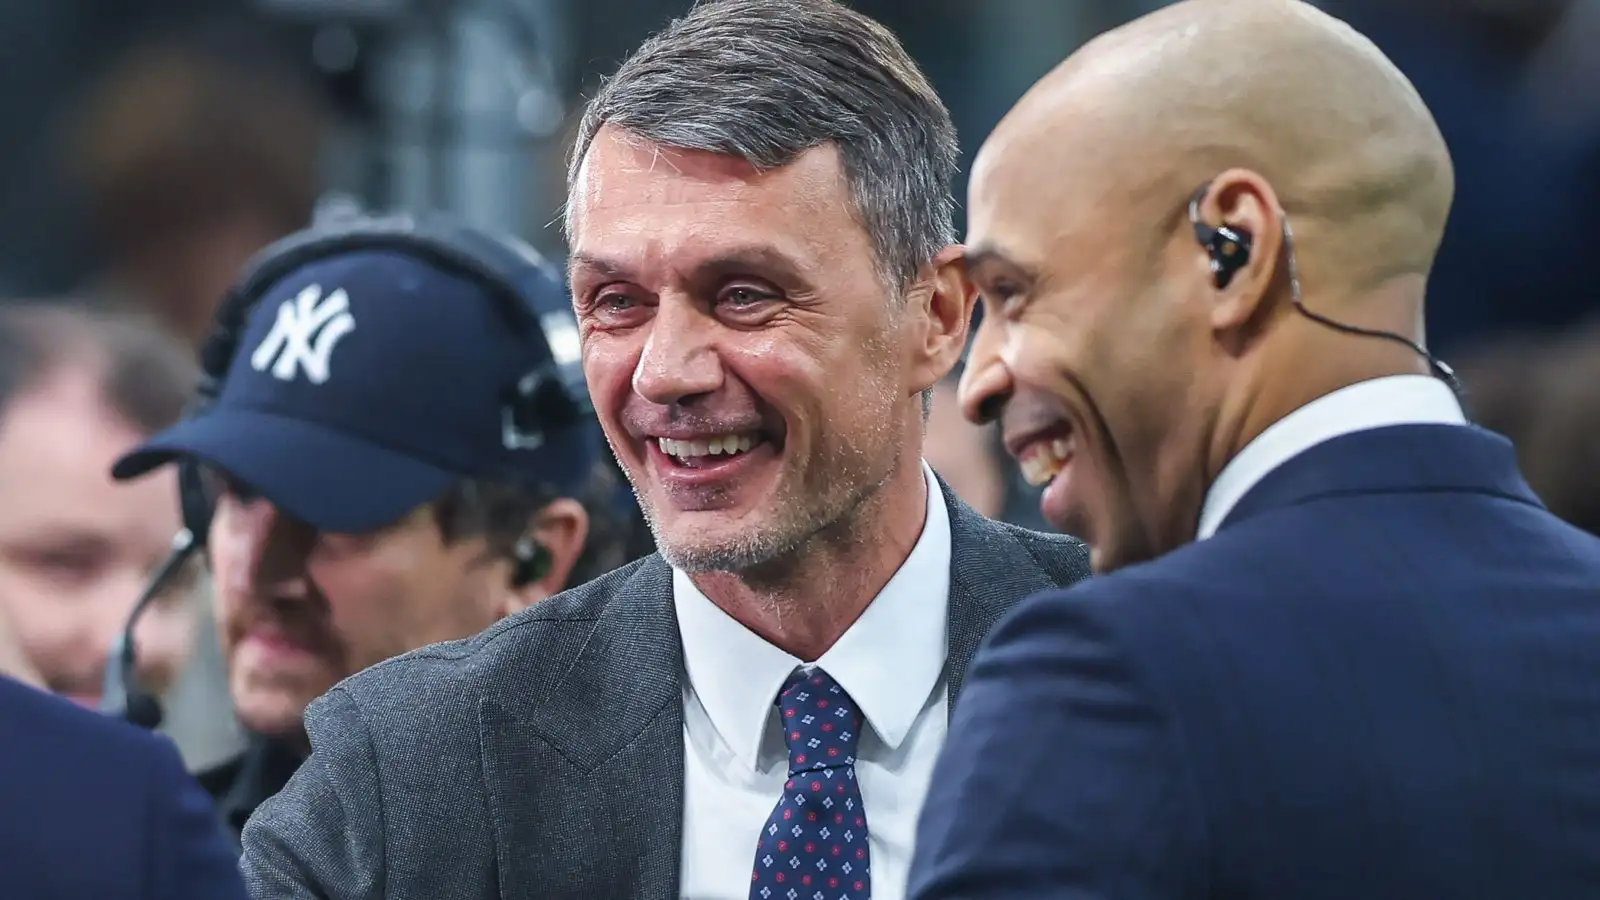 AC Milan legend Paolo Maldini with Thierry Henry during a CBS Sports broadcast.